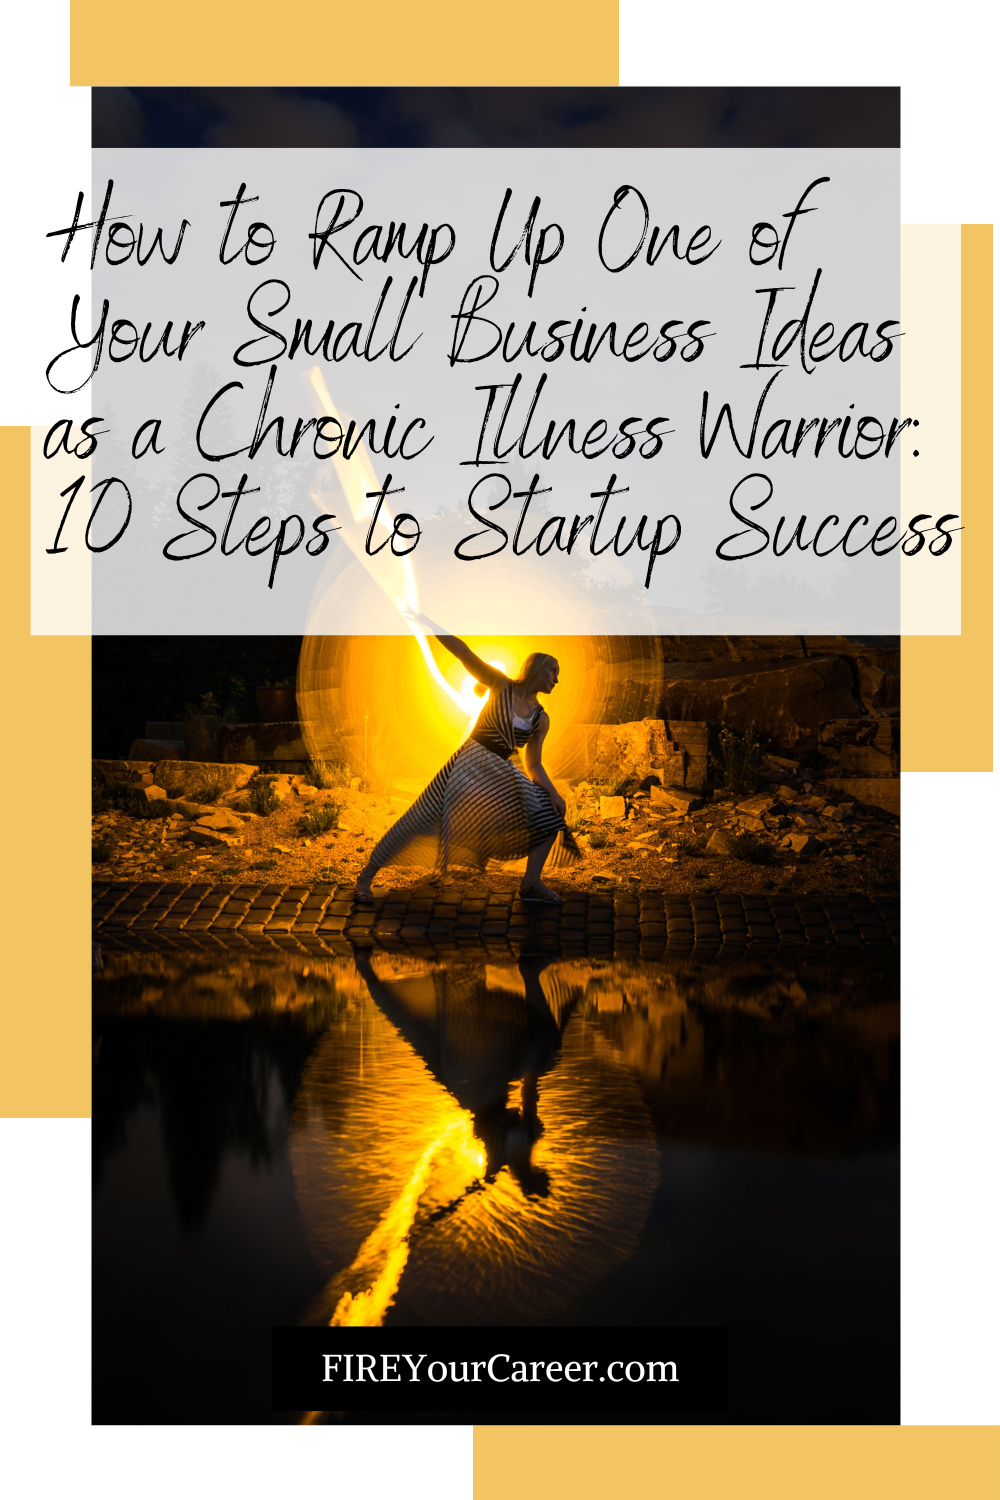 How to Ramp Up One of Your Small Business Ideas as a Chronic Illness Warrior 10 Steps to Startup Success Pinterest